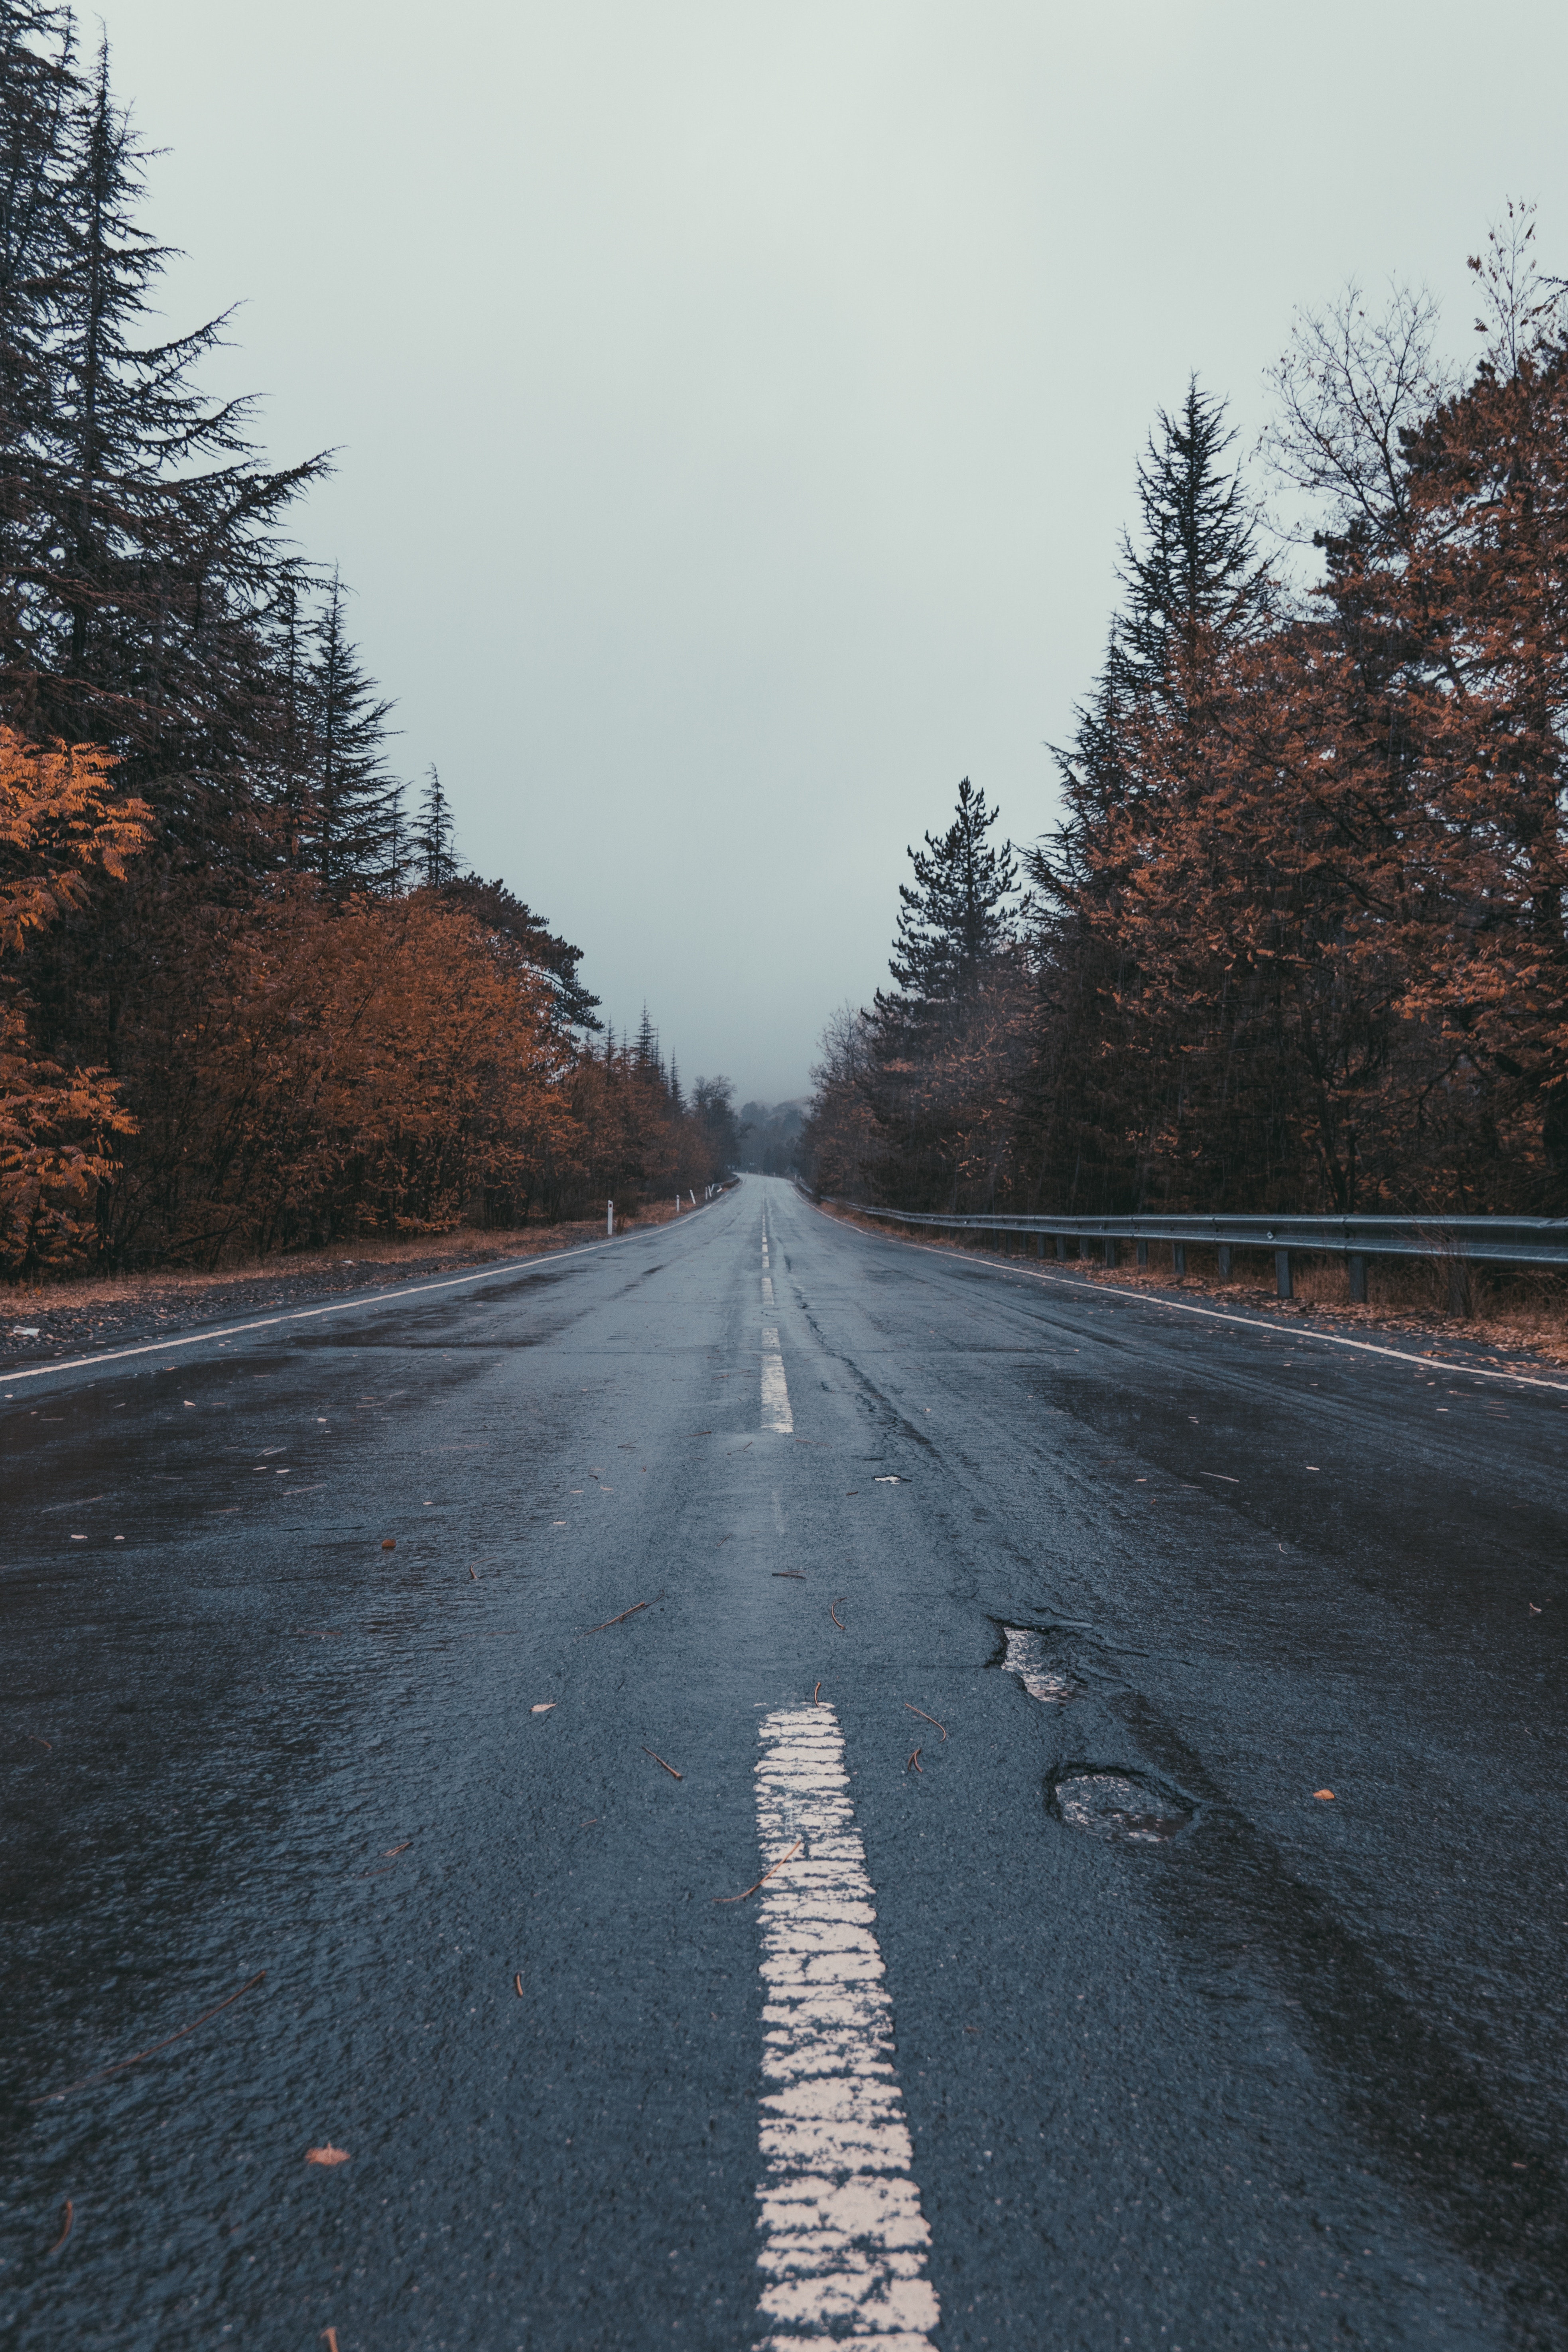 mainly cloudy, nature, trees, road, markup, overcast 1080p